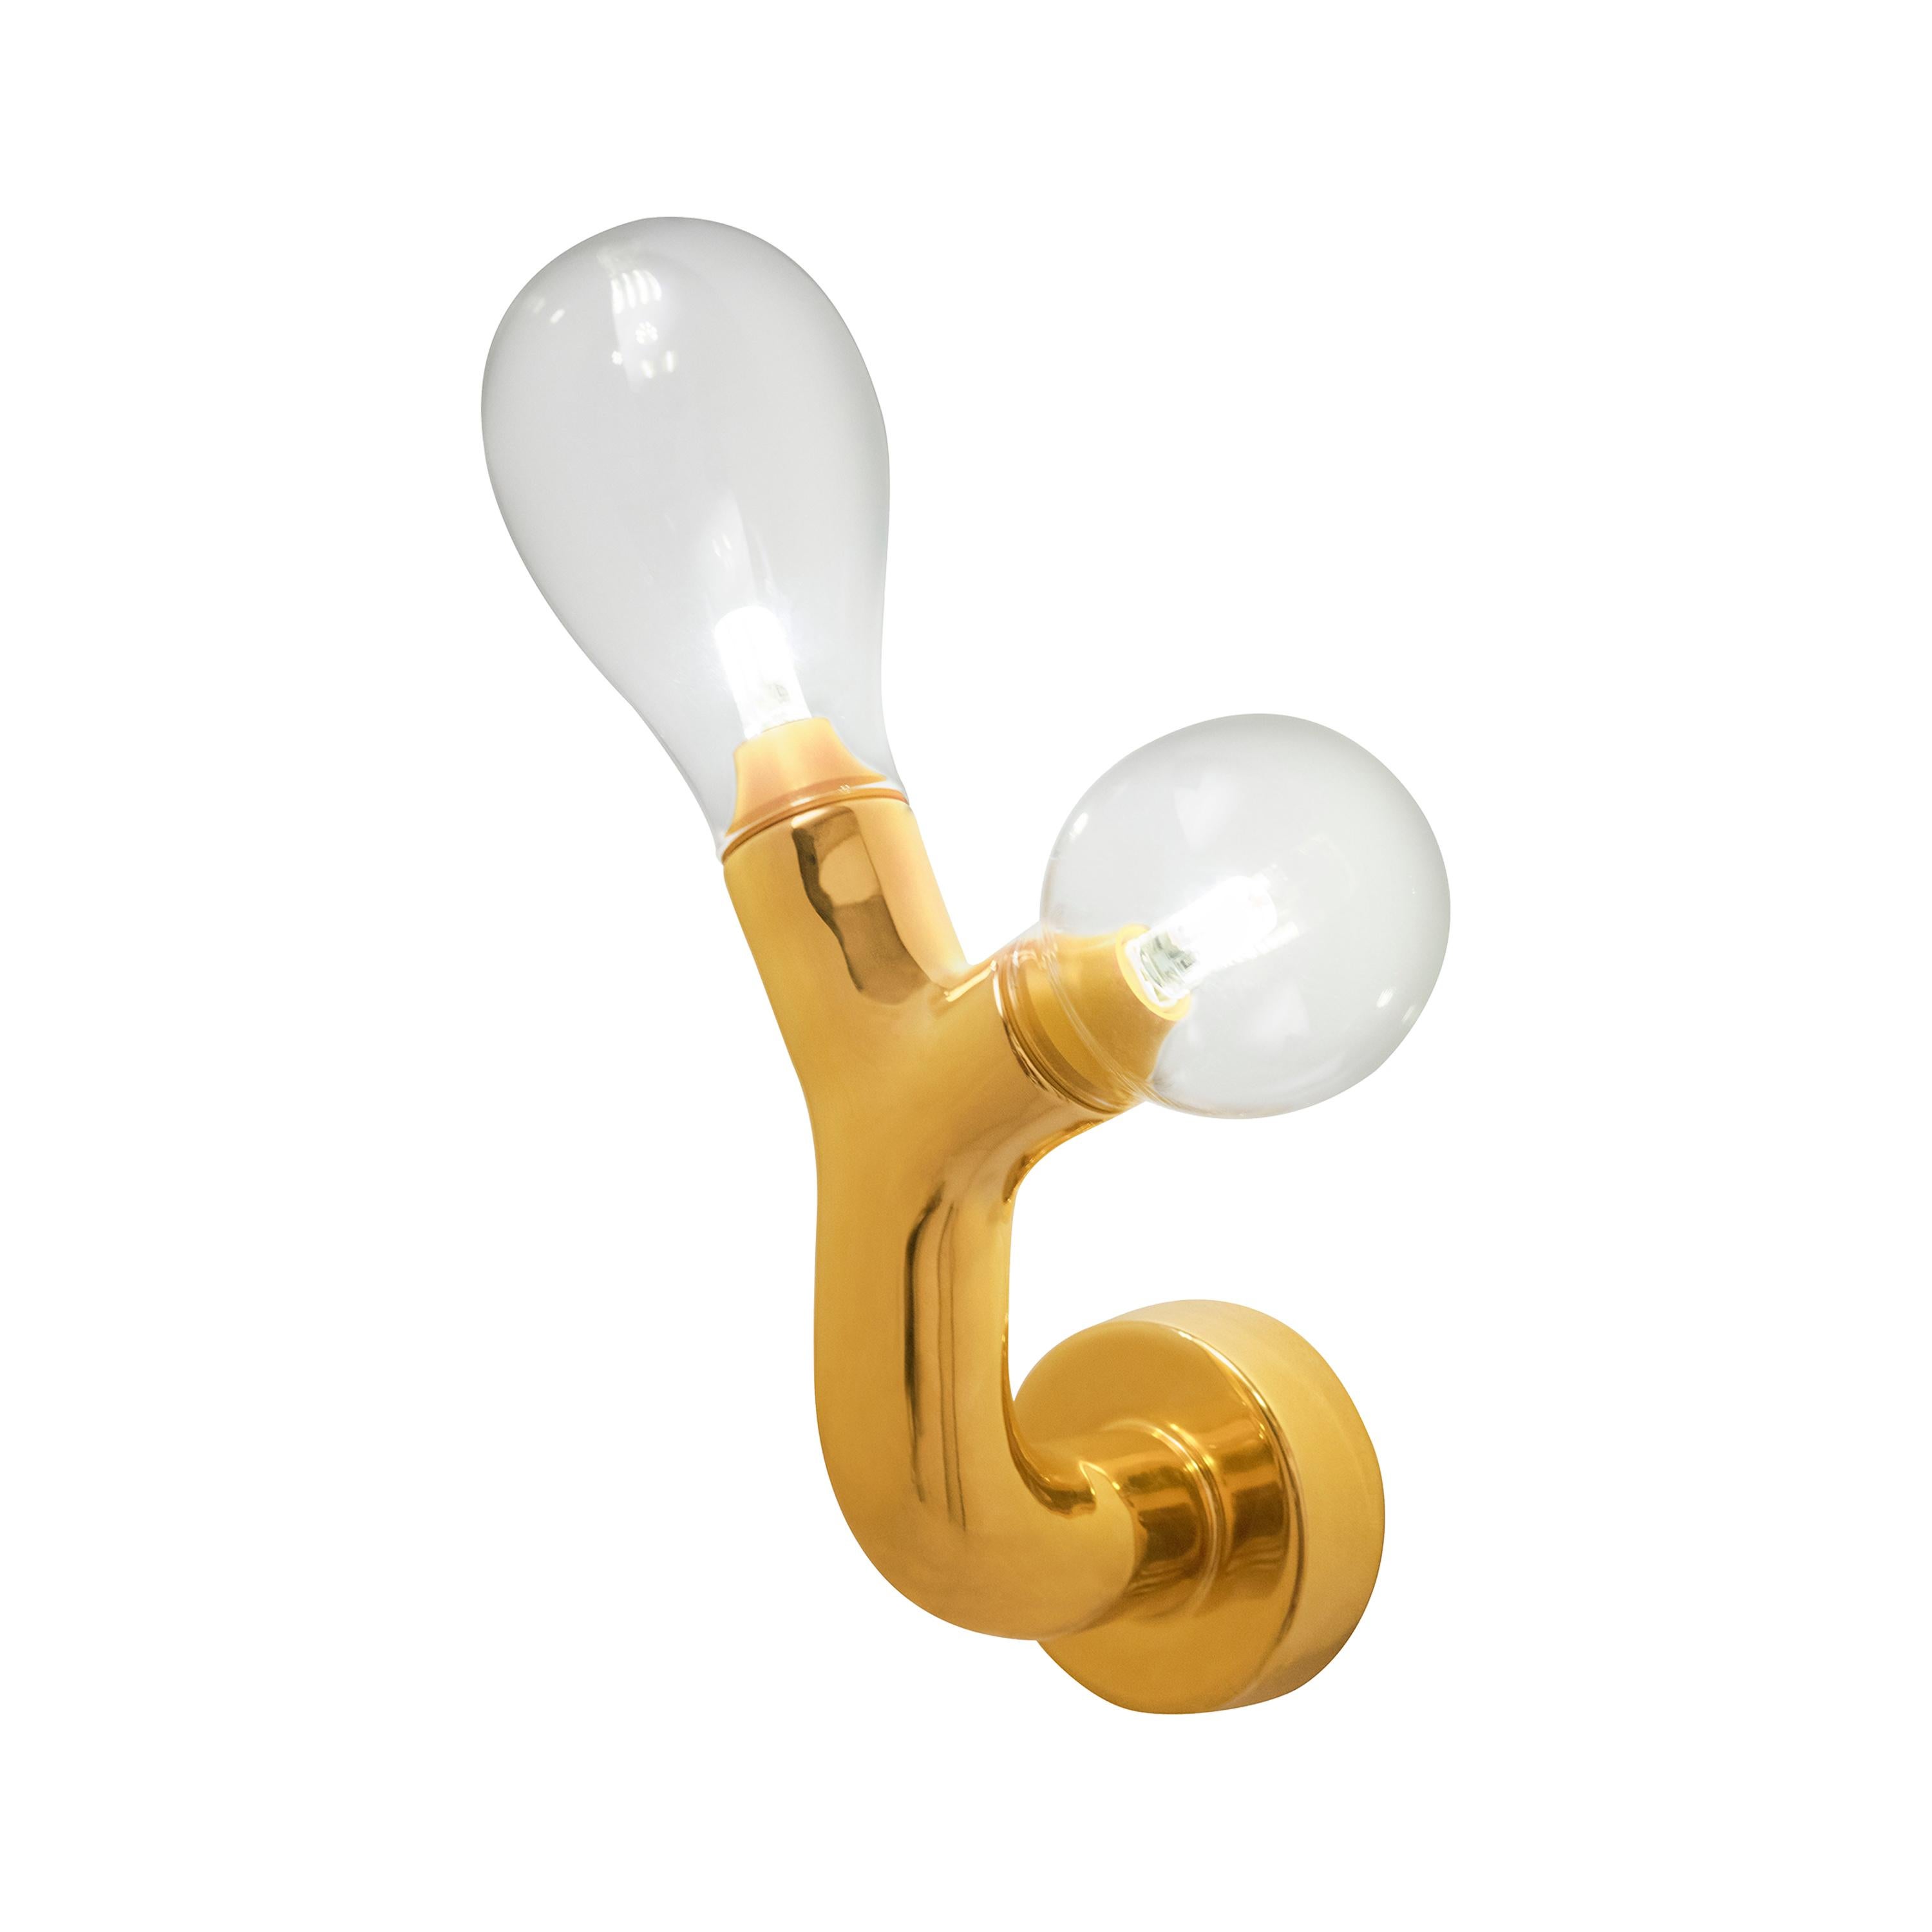 The Double Bulb Gold Plated Murano Glass Wall Light by Matteo Cibic For Sale